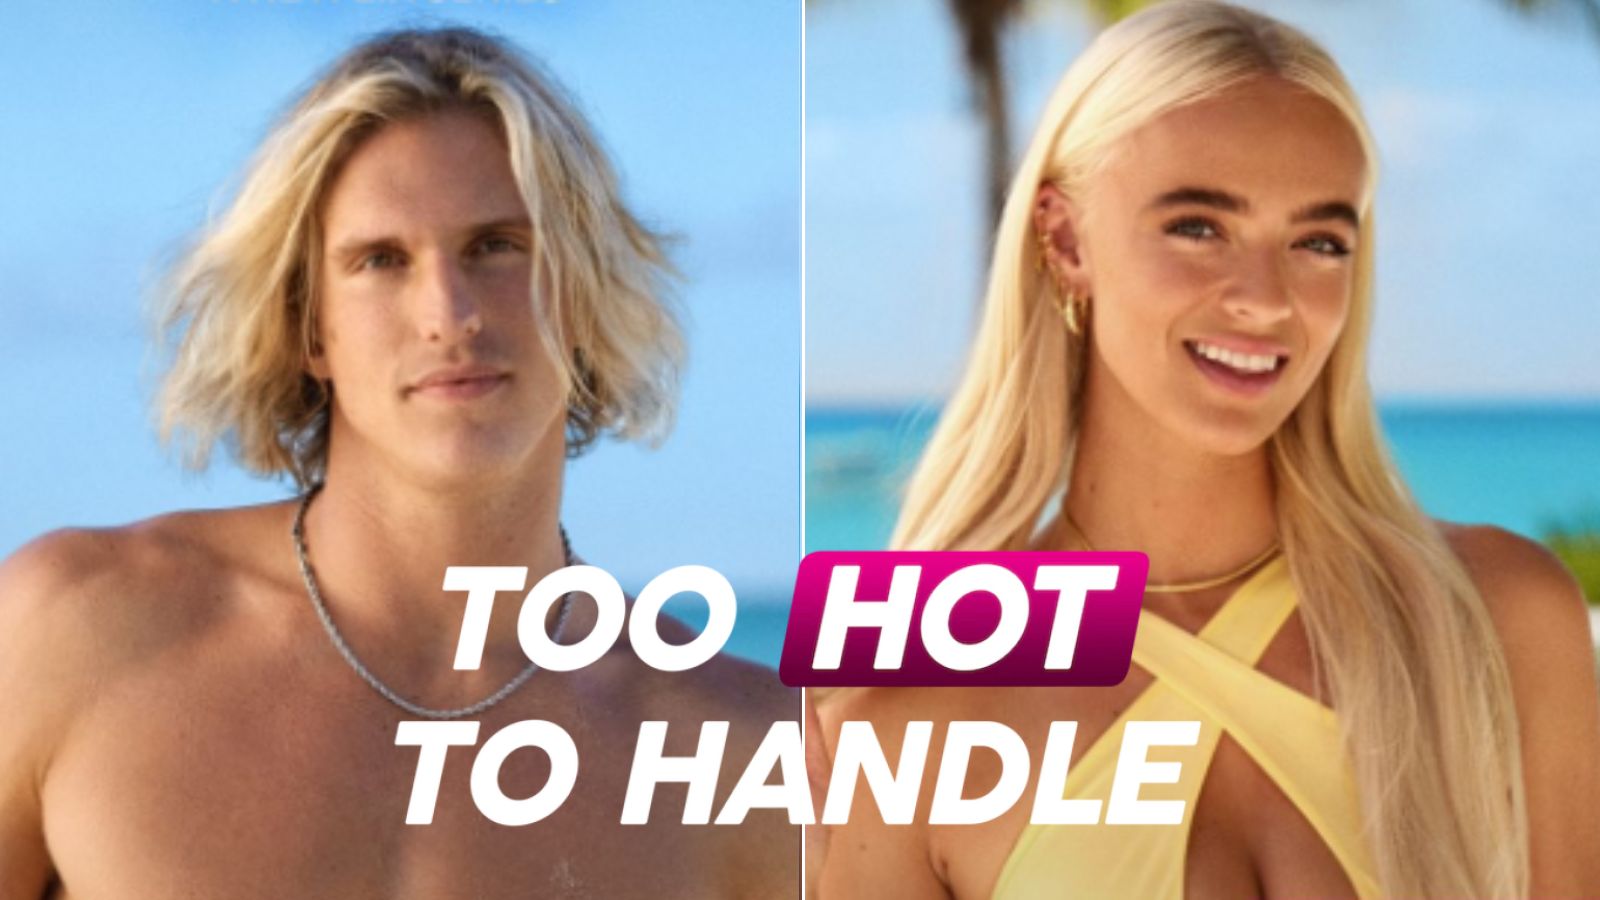 Watch Too Hot to Handle